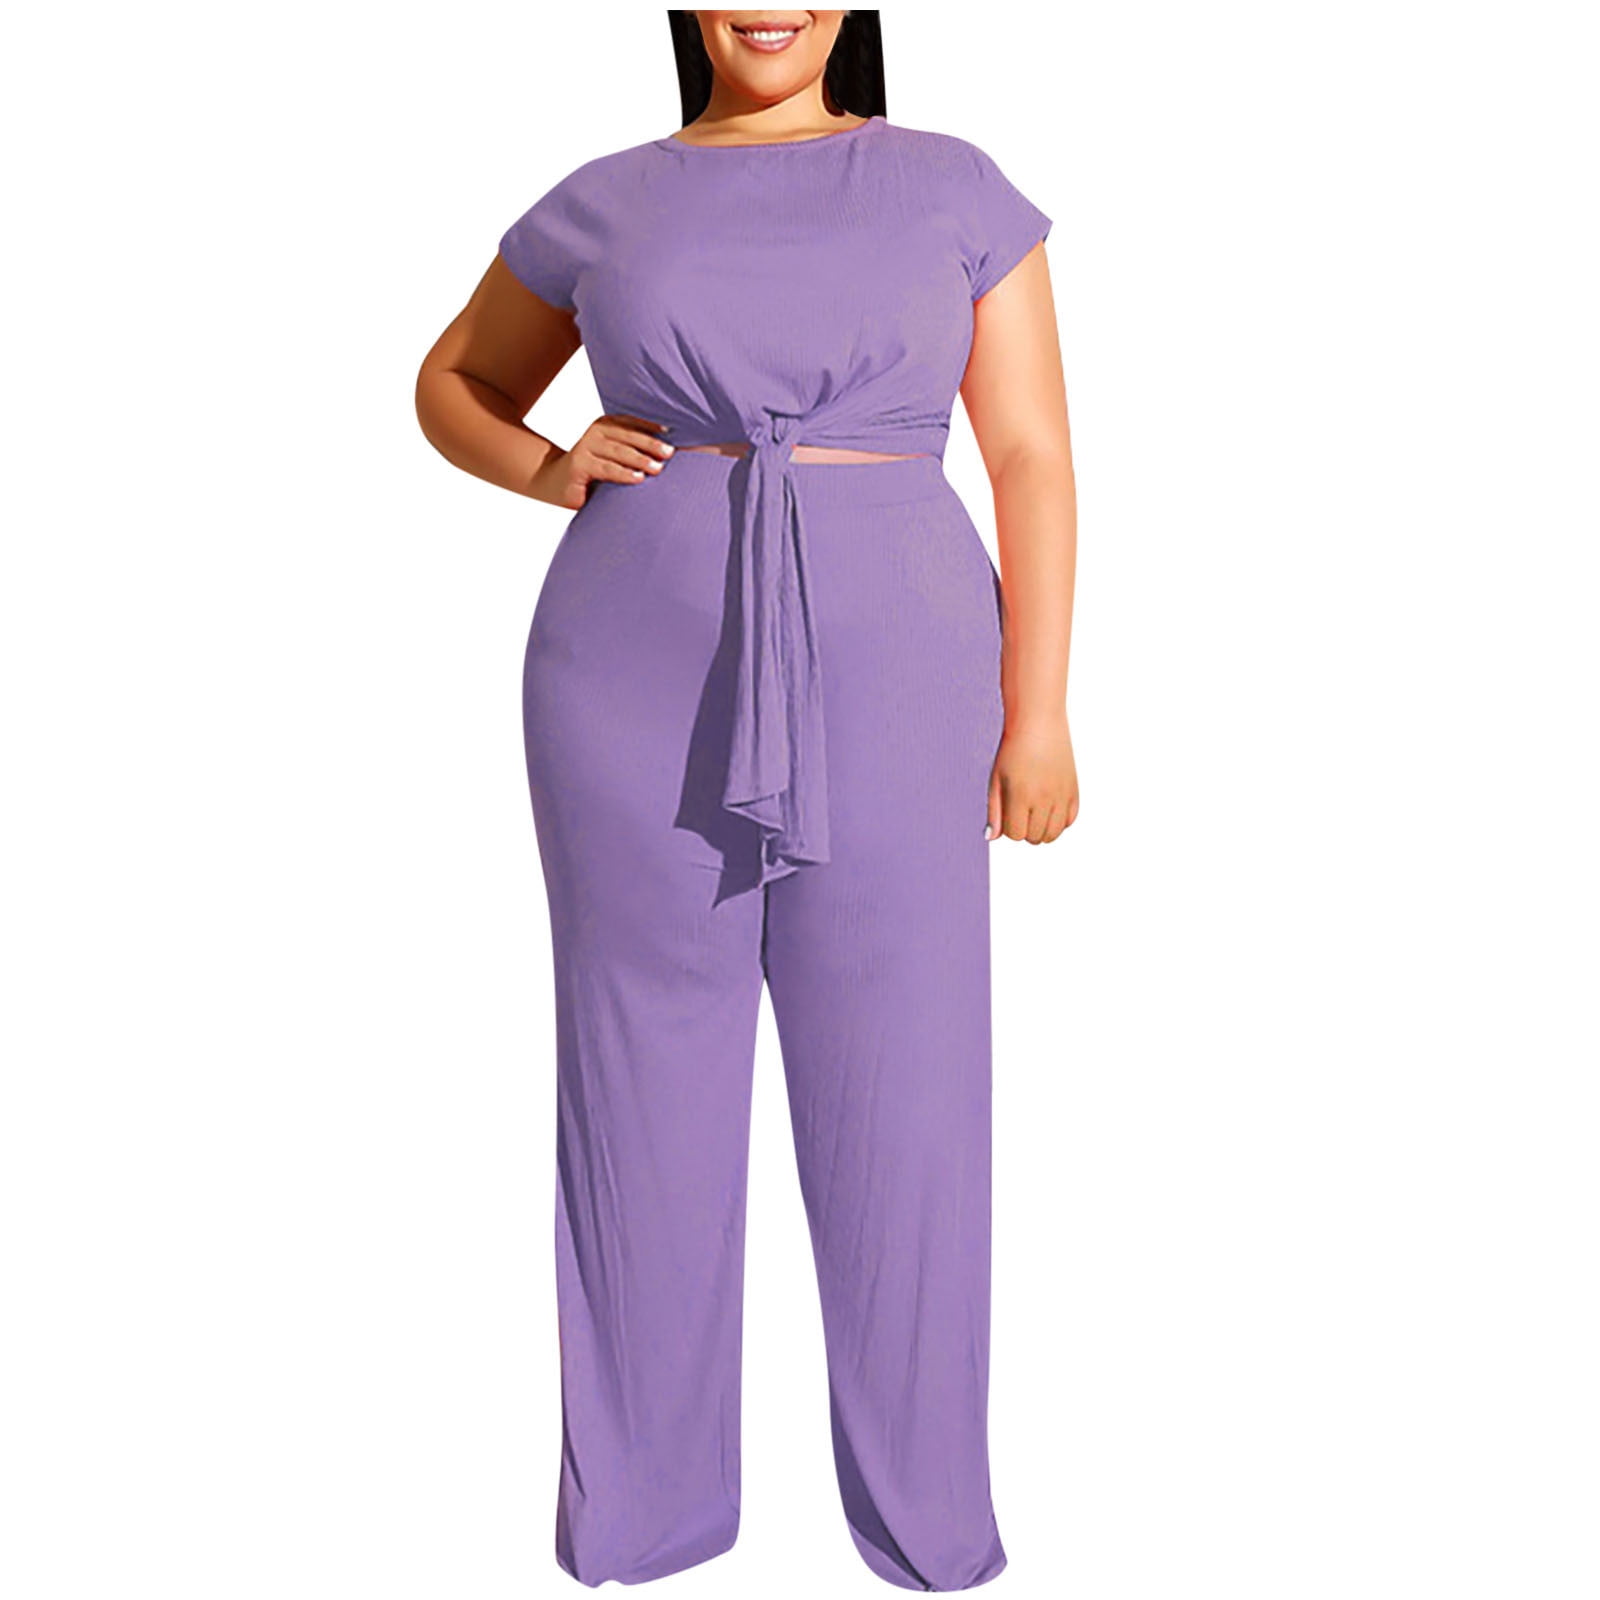 YWDJ Two Piece Outfits for Women Classy Women Plus Size Solid Short Sleeve  O Neck Bandage Pullover Leisure Tops + Long Pants Set Purple L 